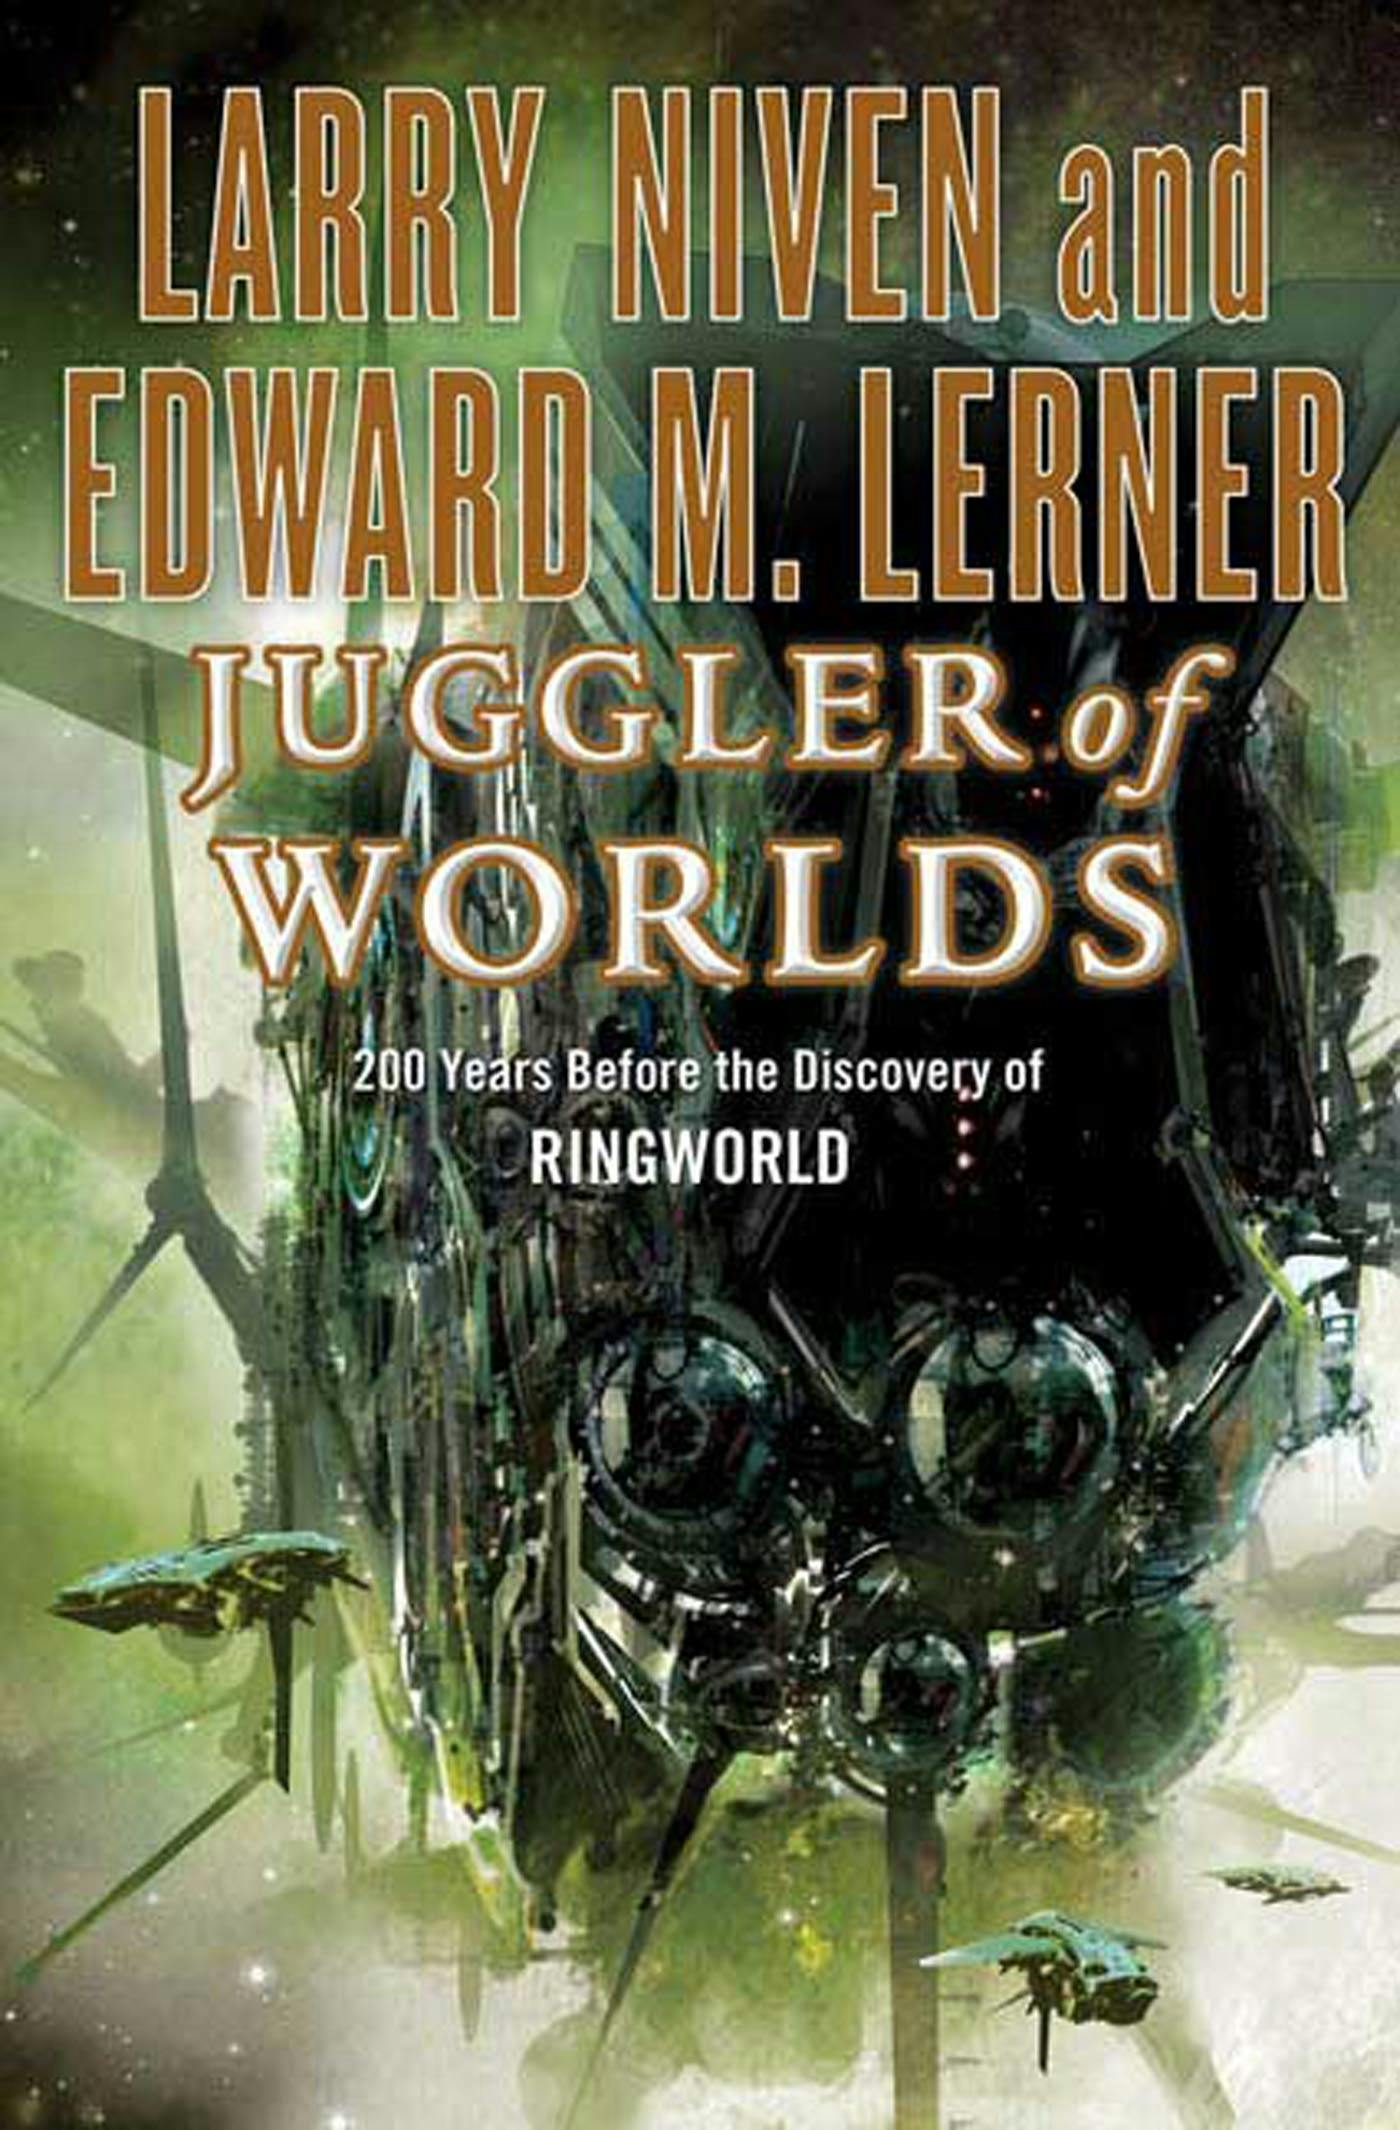 Cover for the book titled as: Juggler of Worlds